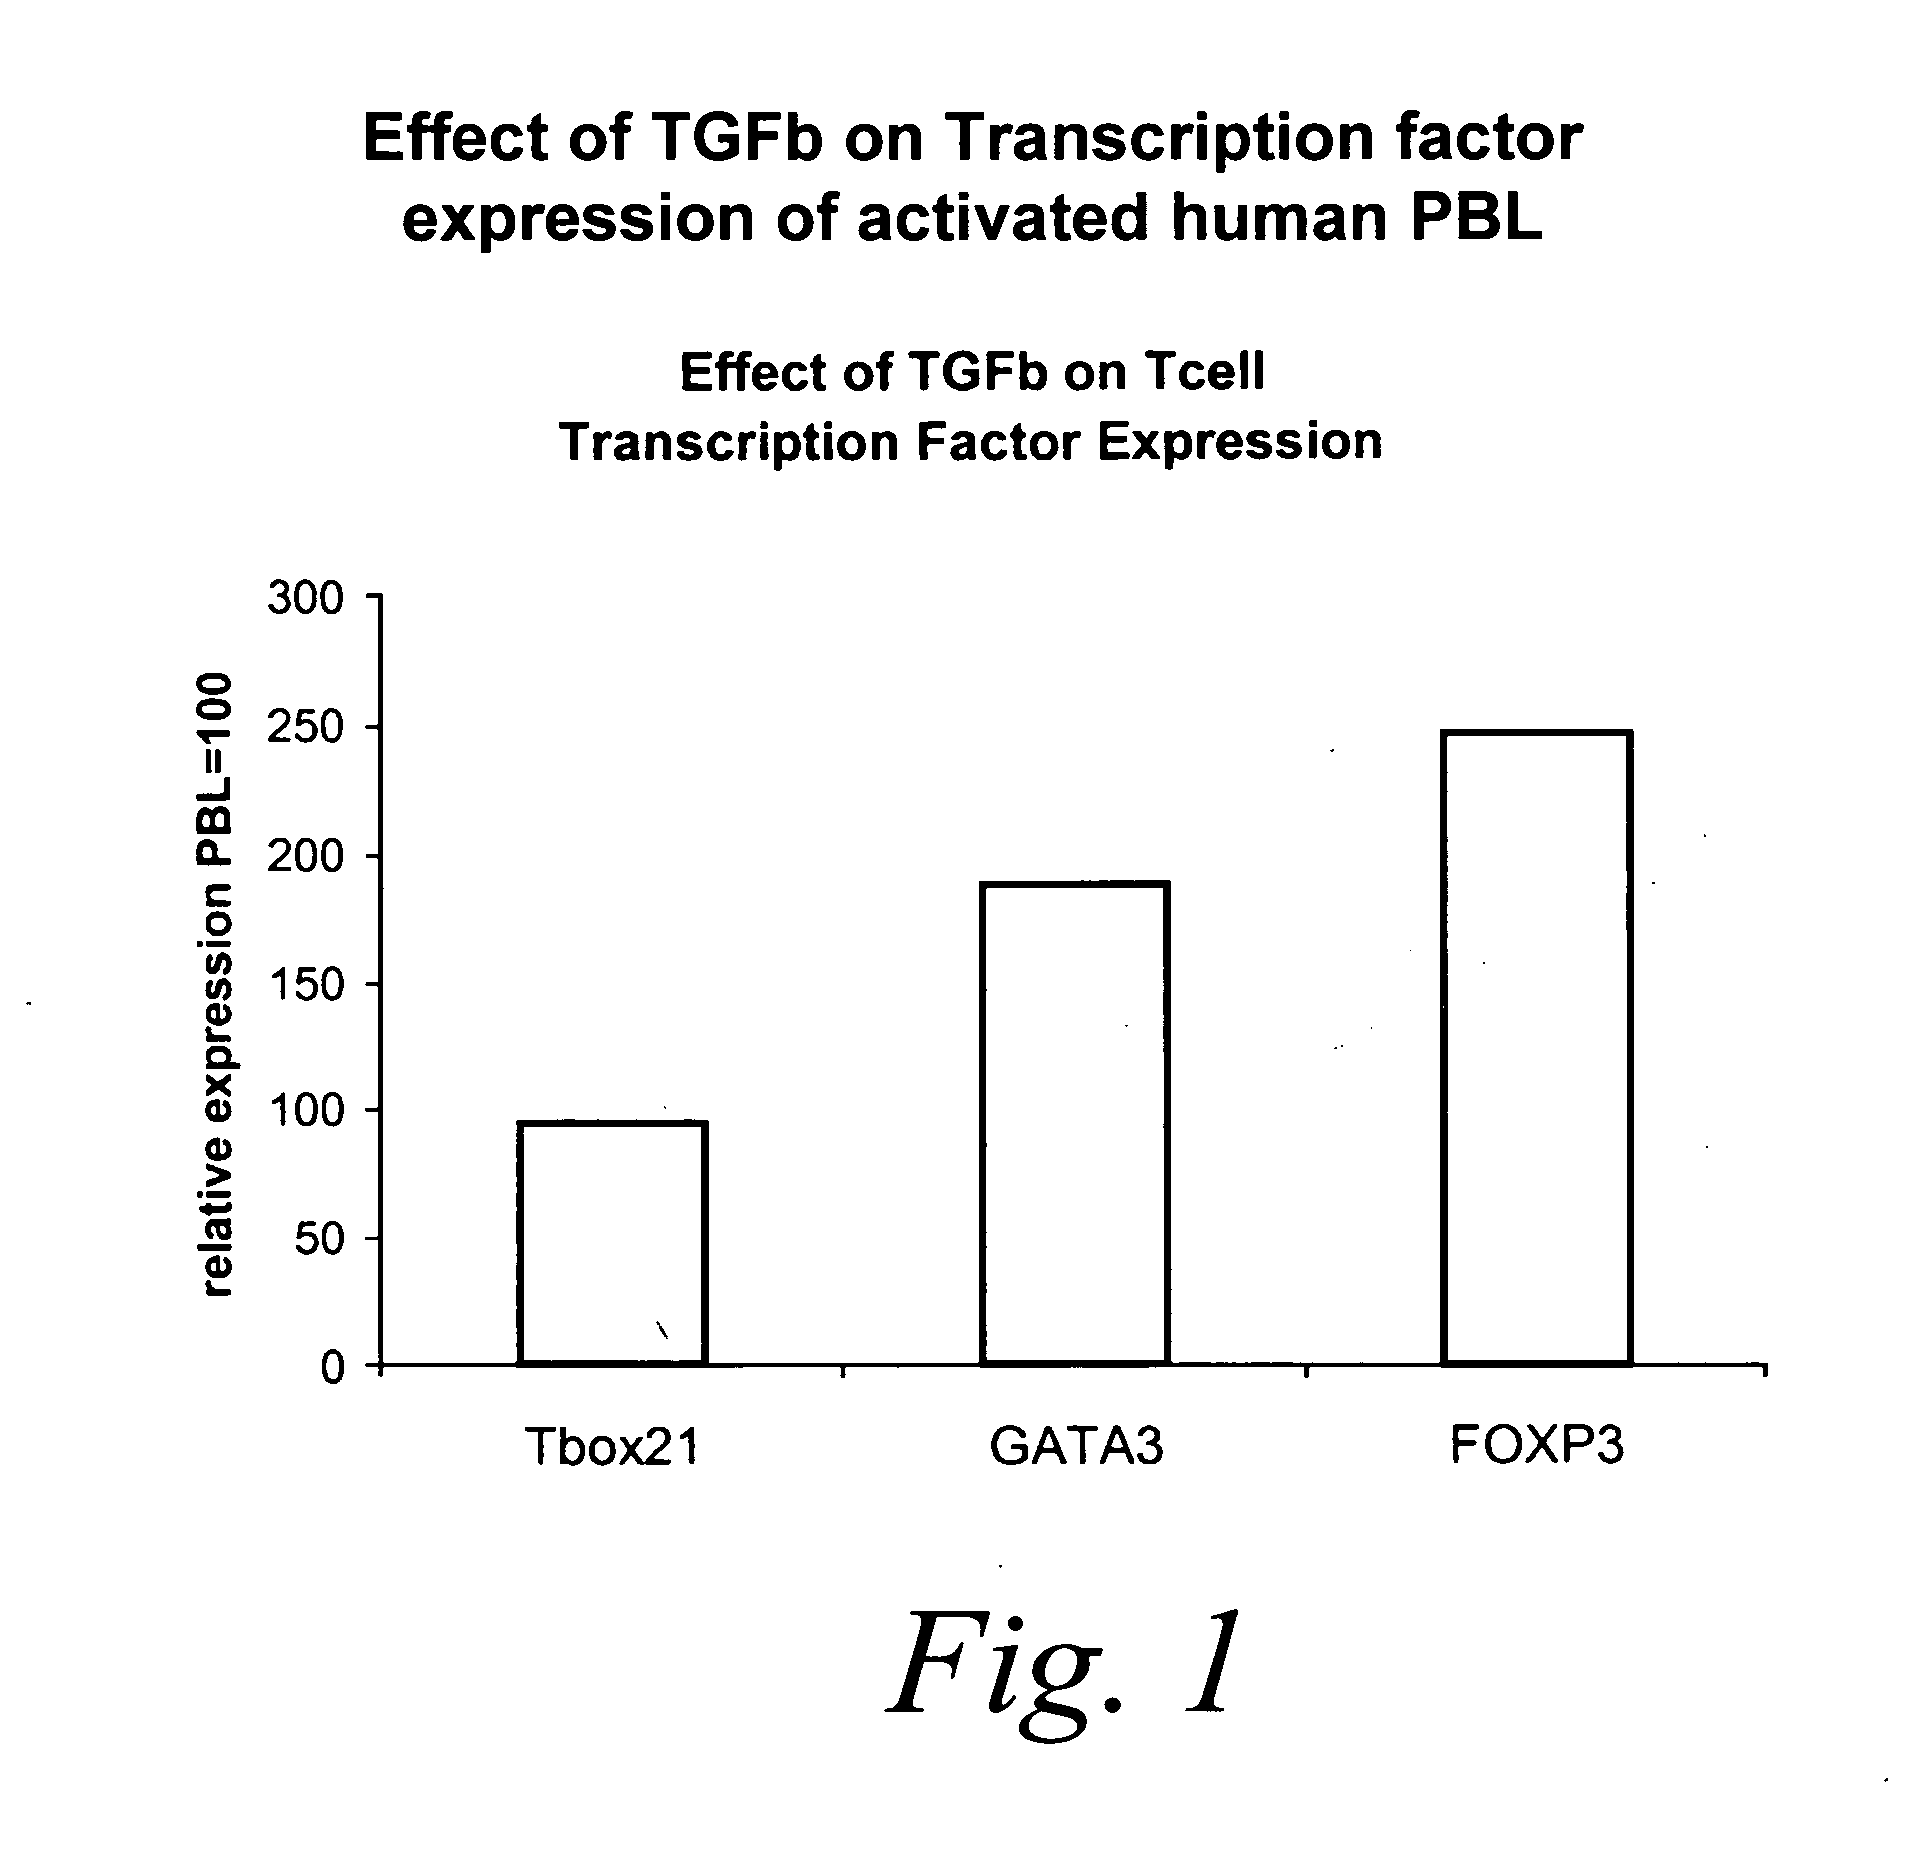 Molecules preferentially associated with effector T cells or regulatory T cells and methods of their use